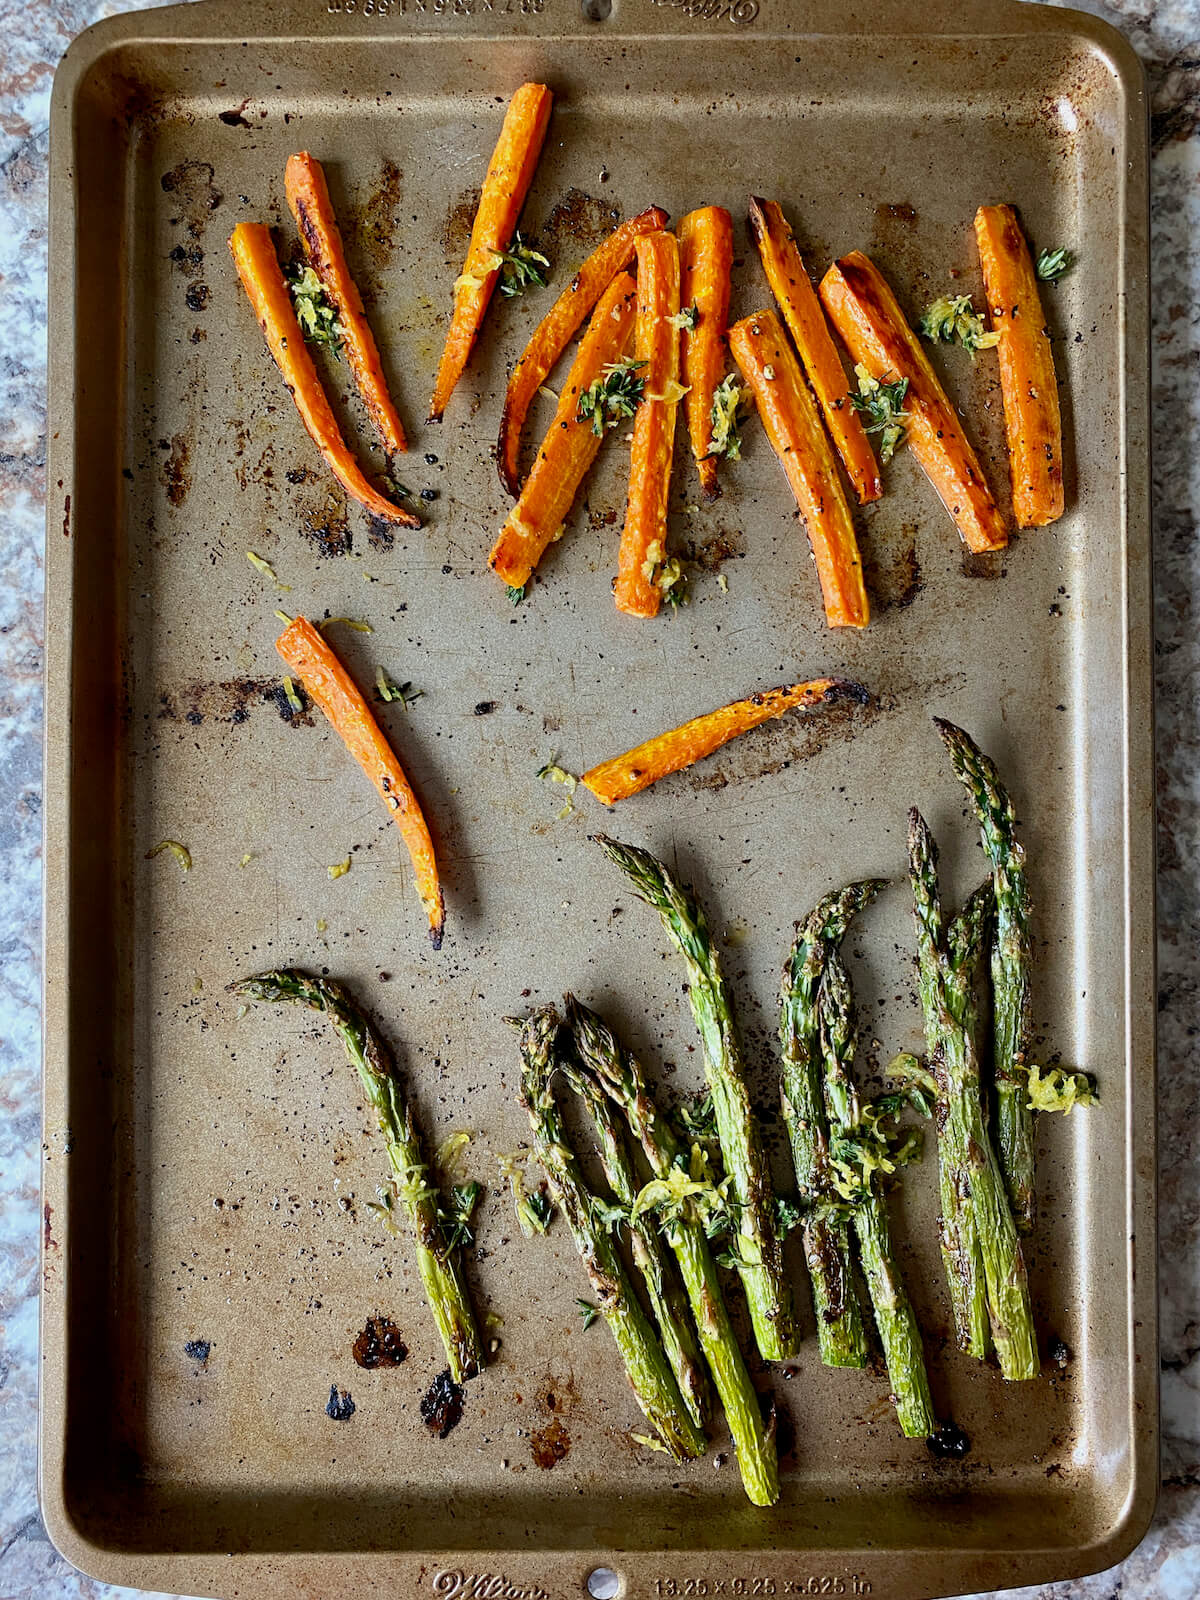 Roasted asparagus and carrots garnished with lemon and thyme on a rimmed baking sheet.